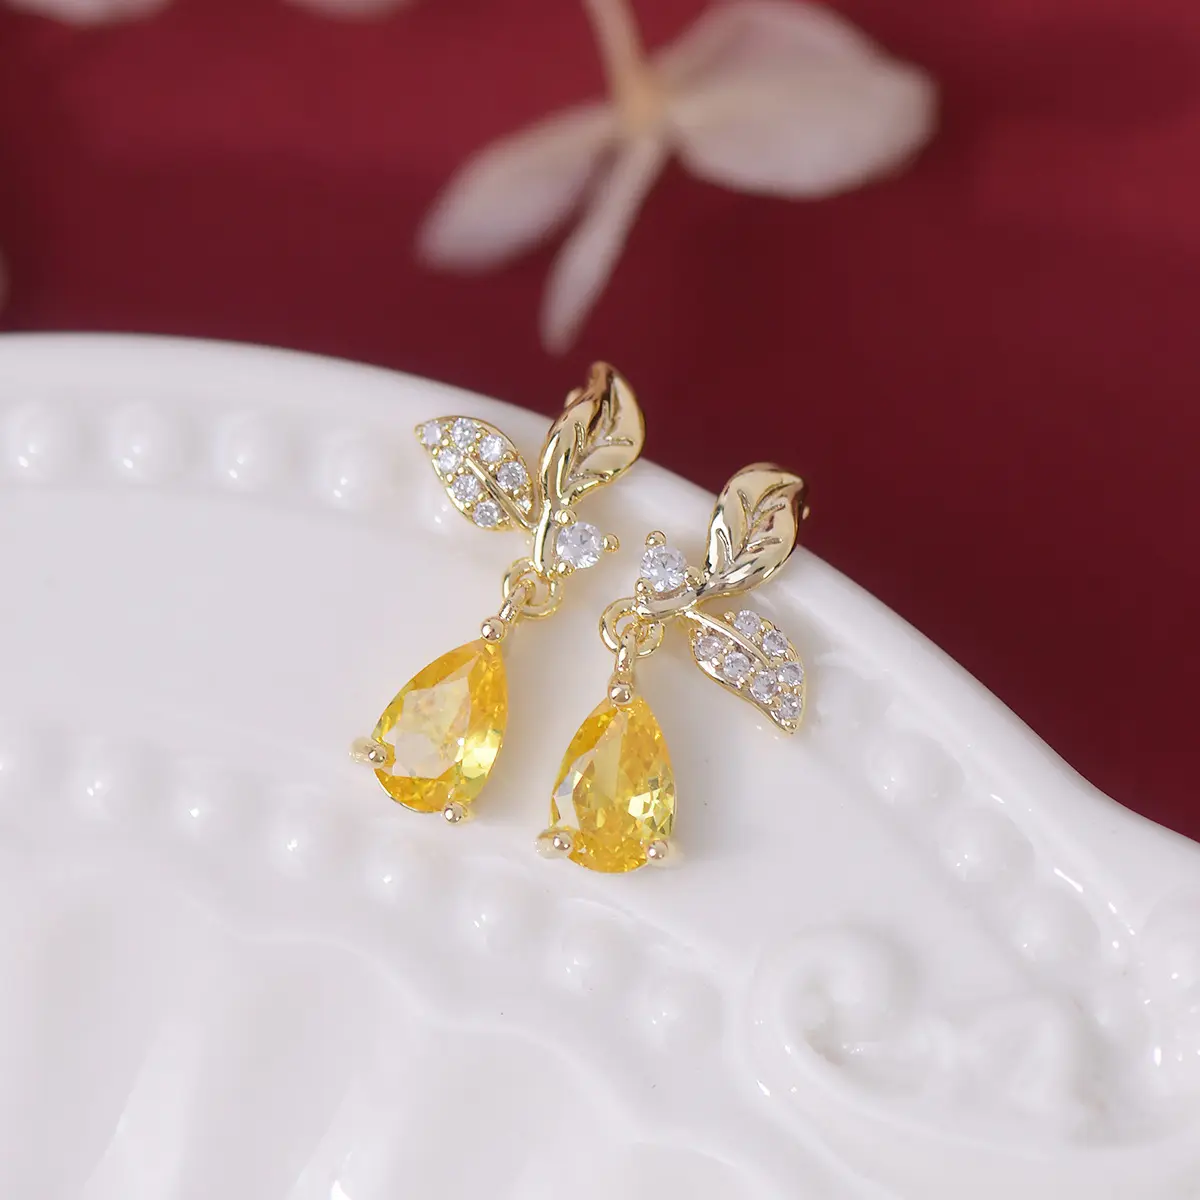 French Style Elegant and Exquisite Leaf Earrings with Delicate Yellow Water Drop Cubic Zirconia Stones - Perfect for Women's Dai